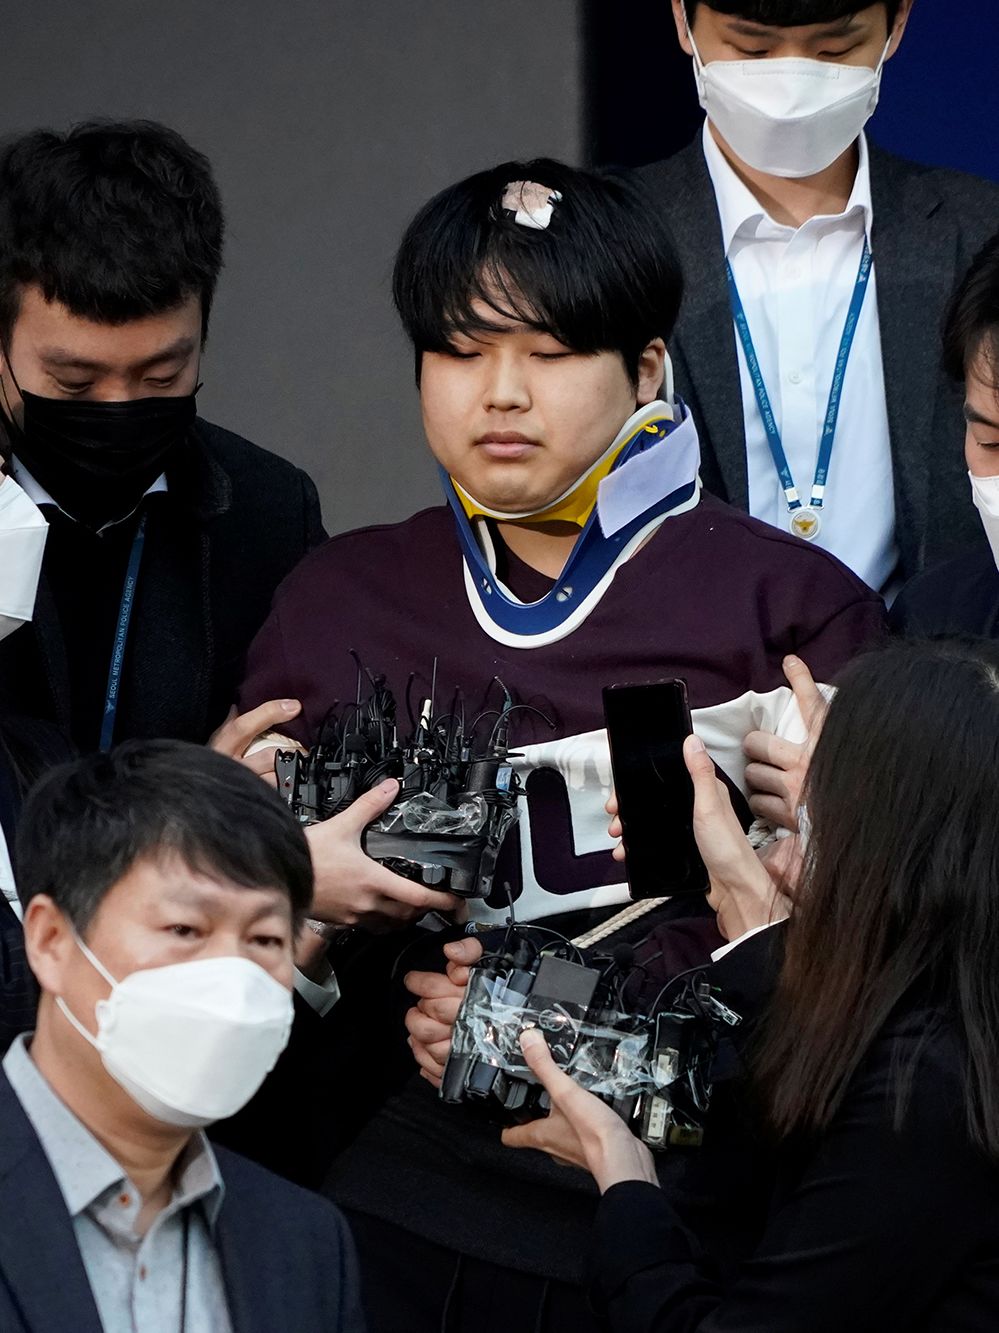 Chaines Blackmail Sex - South Korean leader of Telegram sexual blackmail ring sentenced to 40 years  | CNN